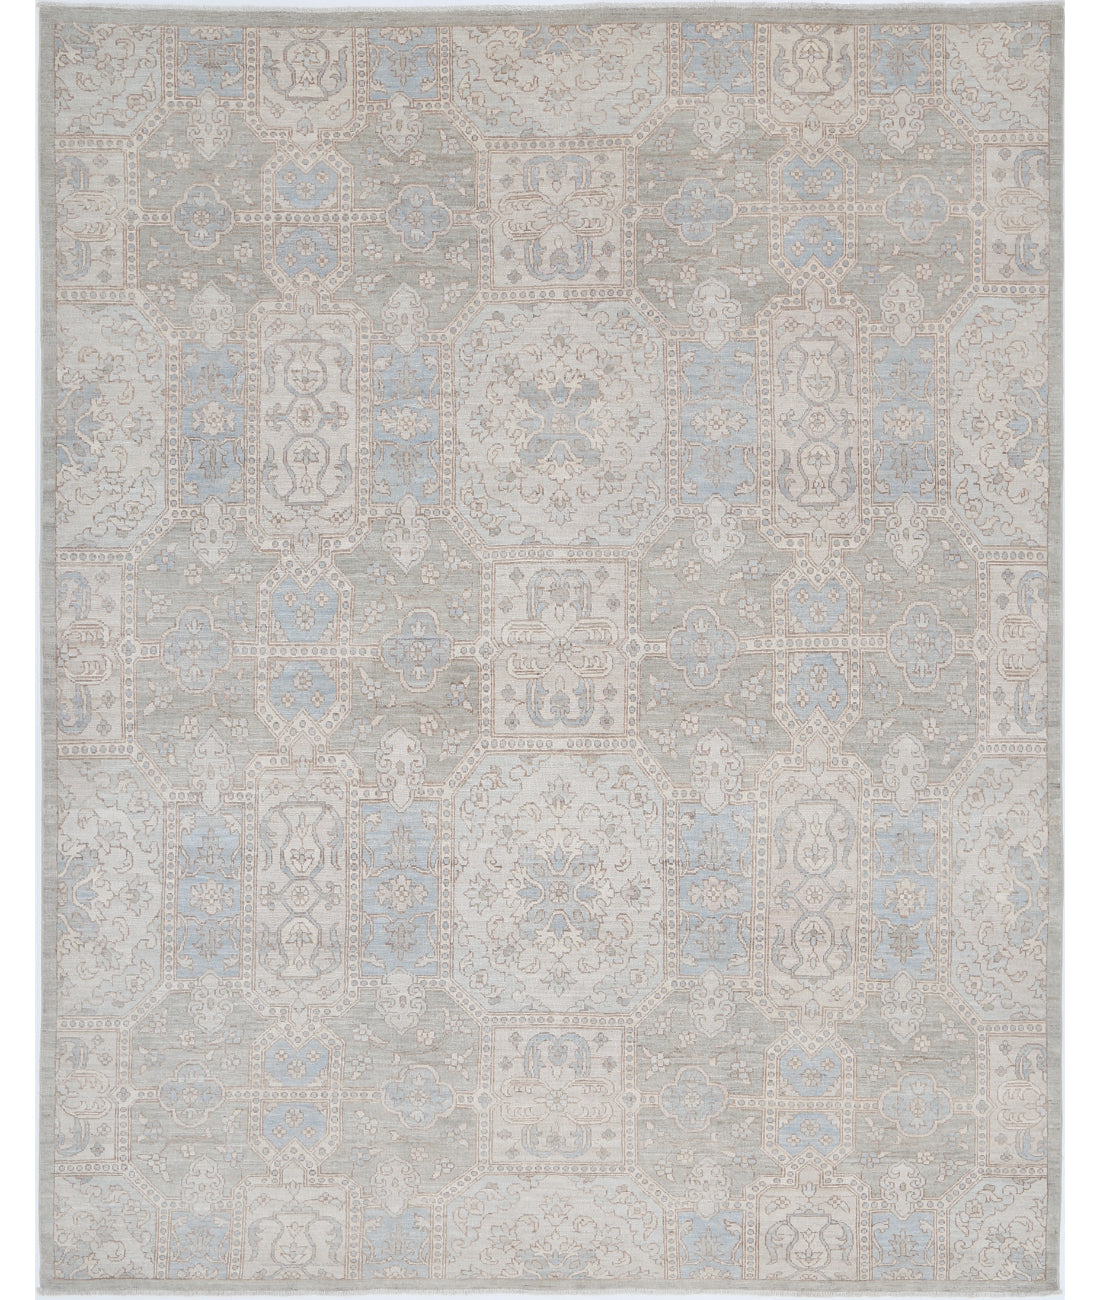 Hand Knotted Serenity Wool Rug - 7'8'' x 9'8'' 7'8'' x 9'8'' (230 X 290) / Green / N/A